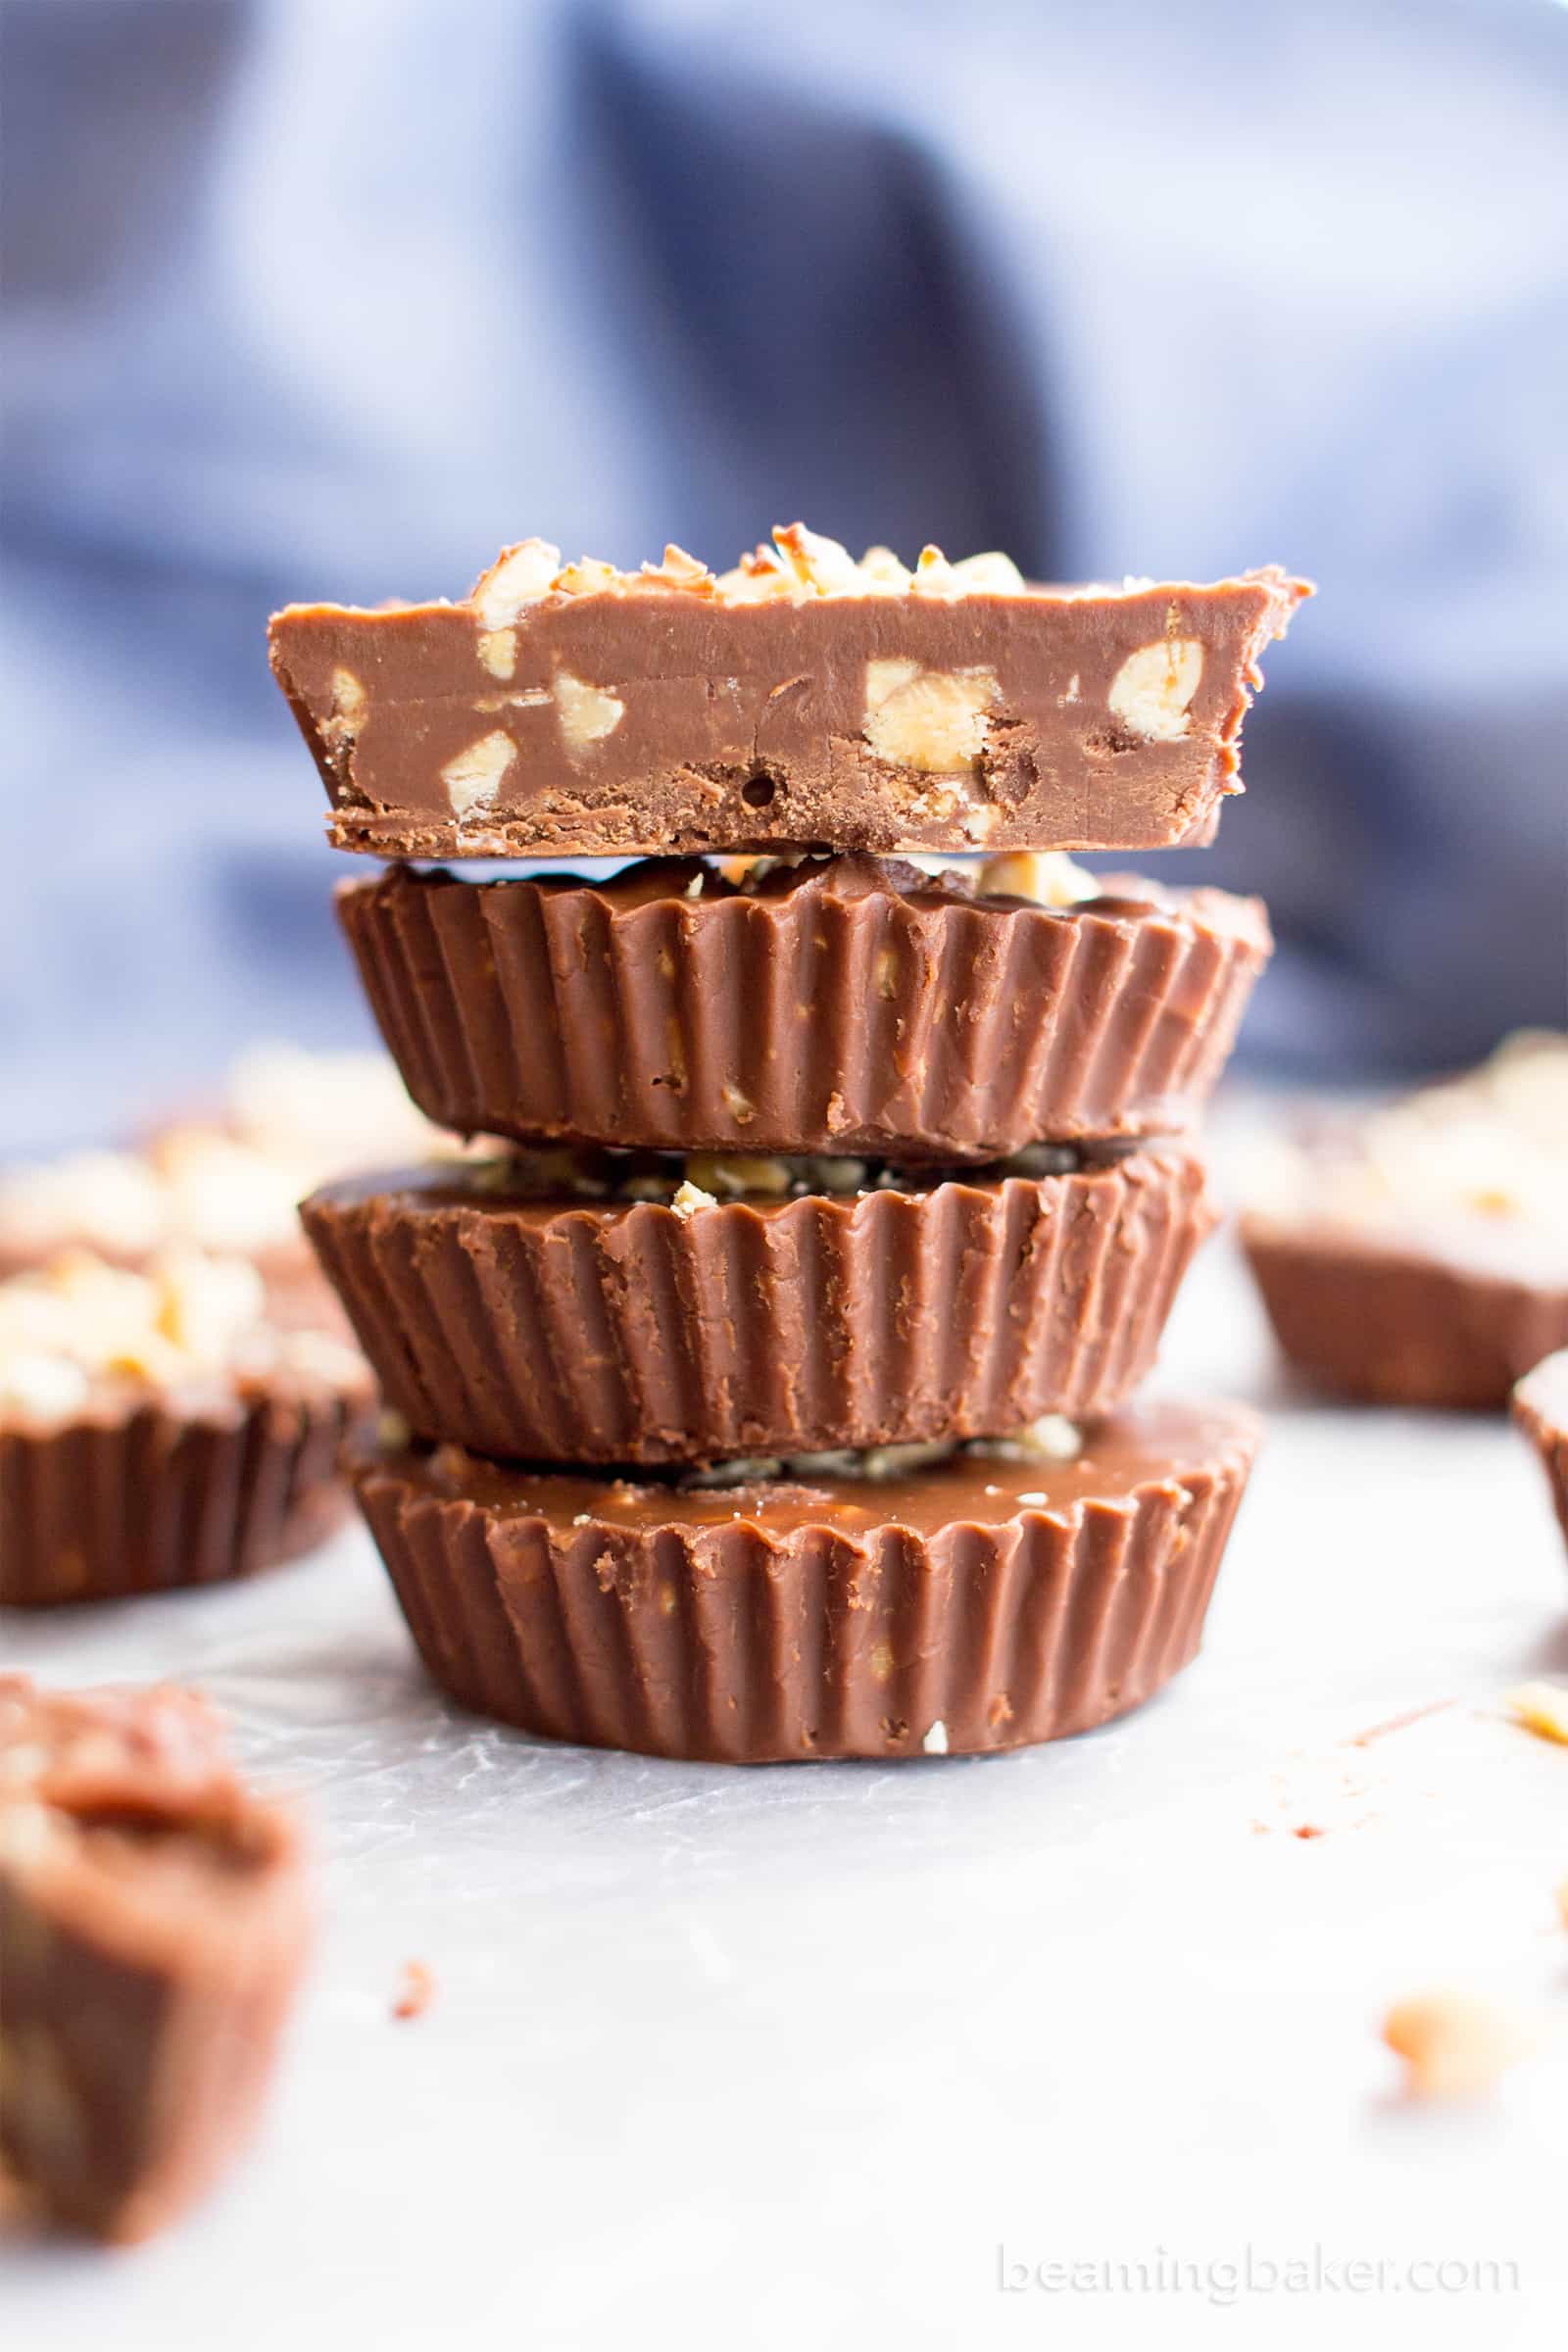 3 Ingredient Chocolate Peanut Butter Fudge Cups (V, GF): an easy, one bowl recipe for deliciously thick fudge cups bursting with peanut butter YUM. #Vegan #GlutenFree #DairyFree | BeamingBaker.com